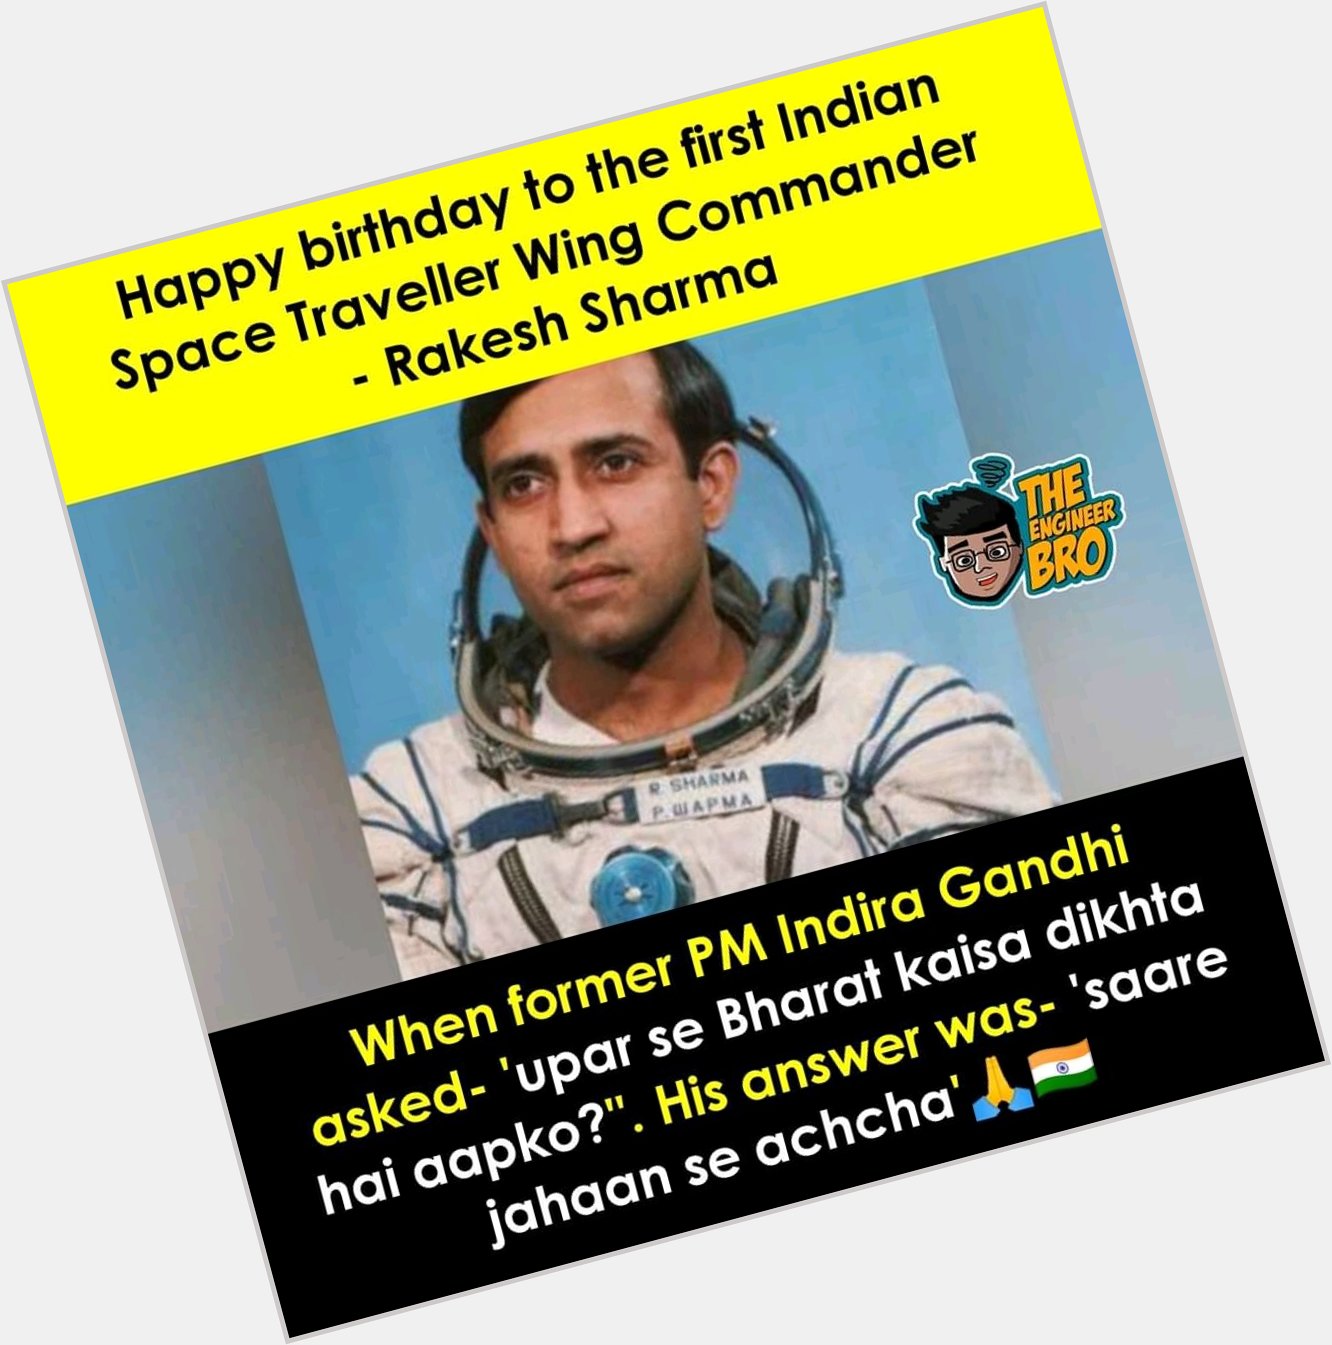 Happy birthday our pride our first indian space traveller wing commander Rakesh Sharma sir   .    